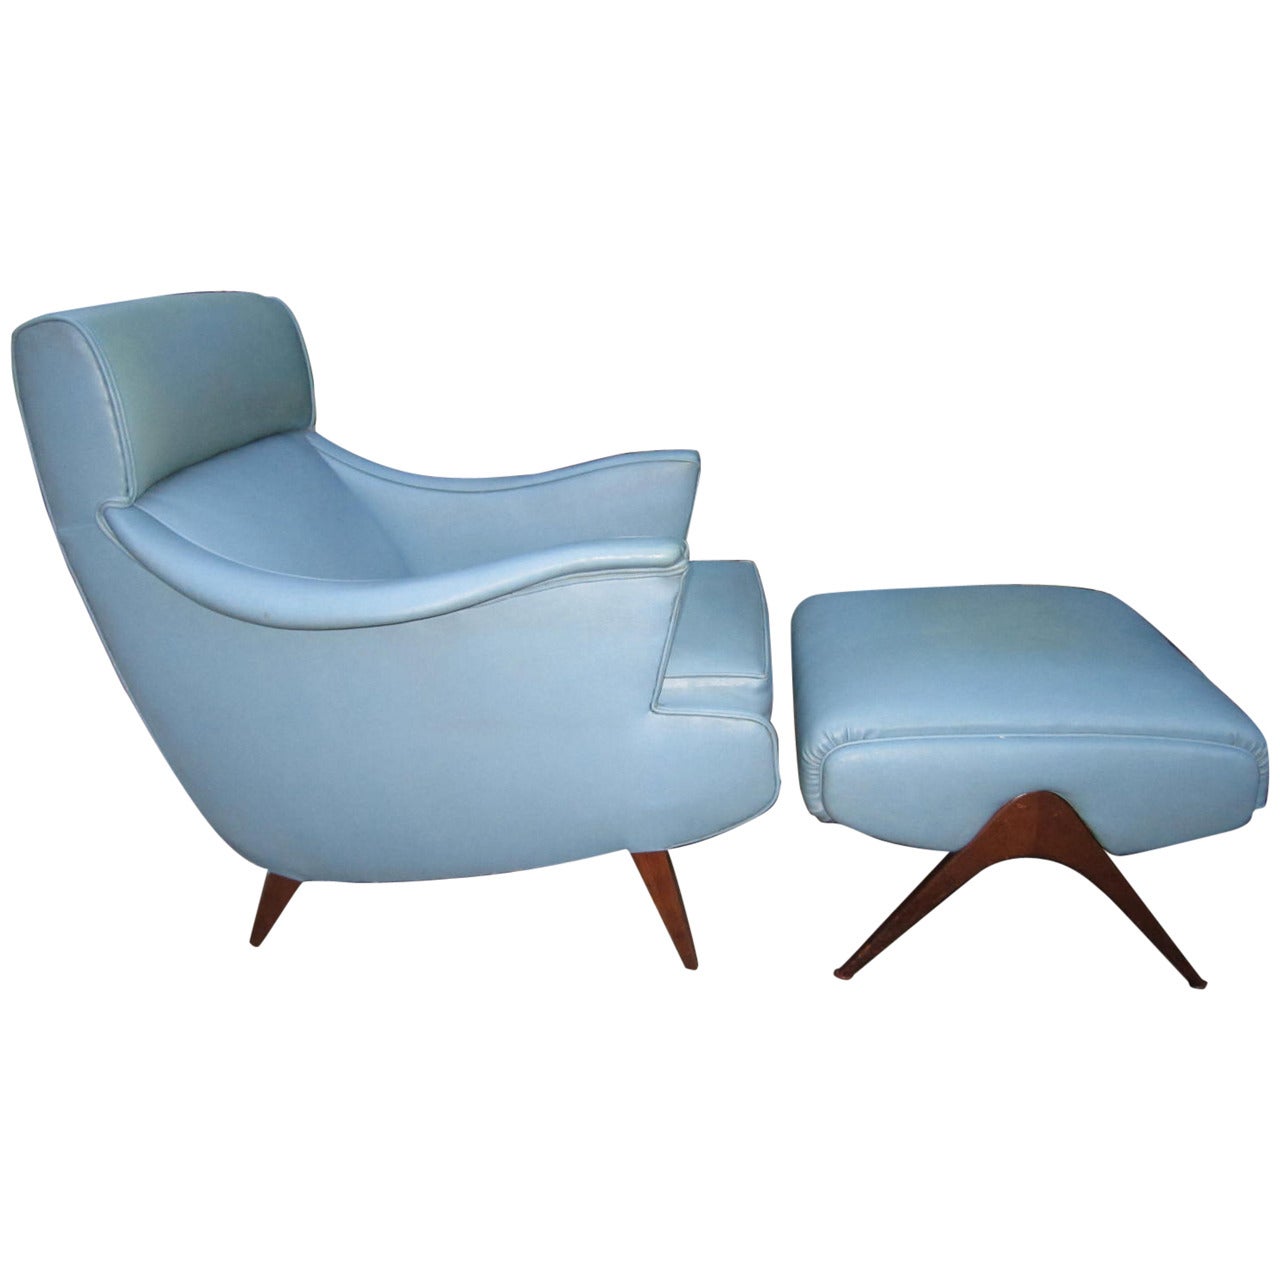 Exciting Mid-Century Modern Lounge Chair with Ottoman For Sale